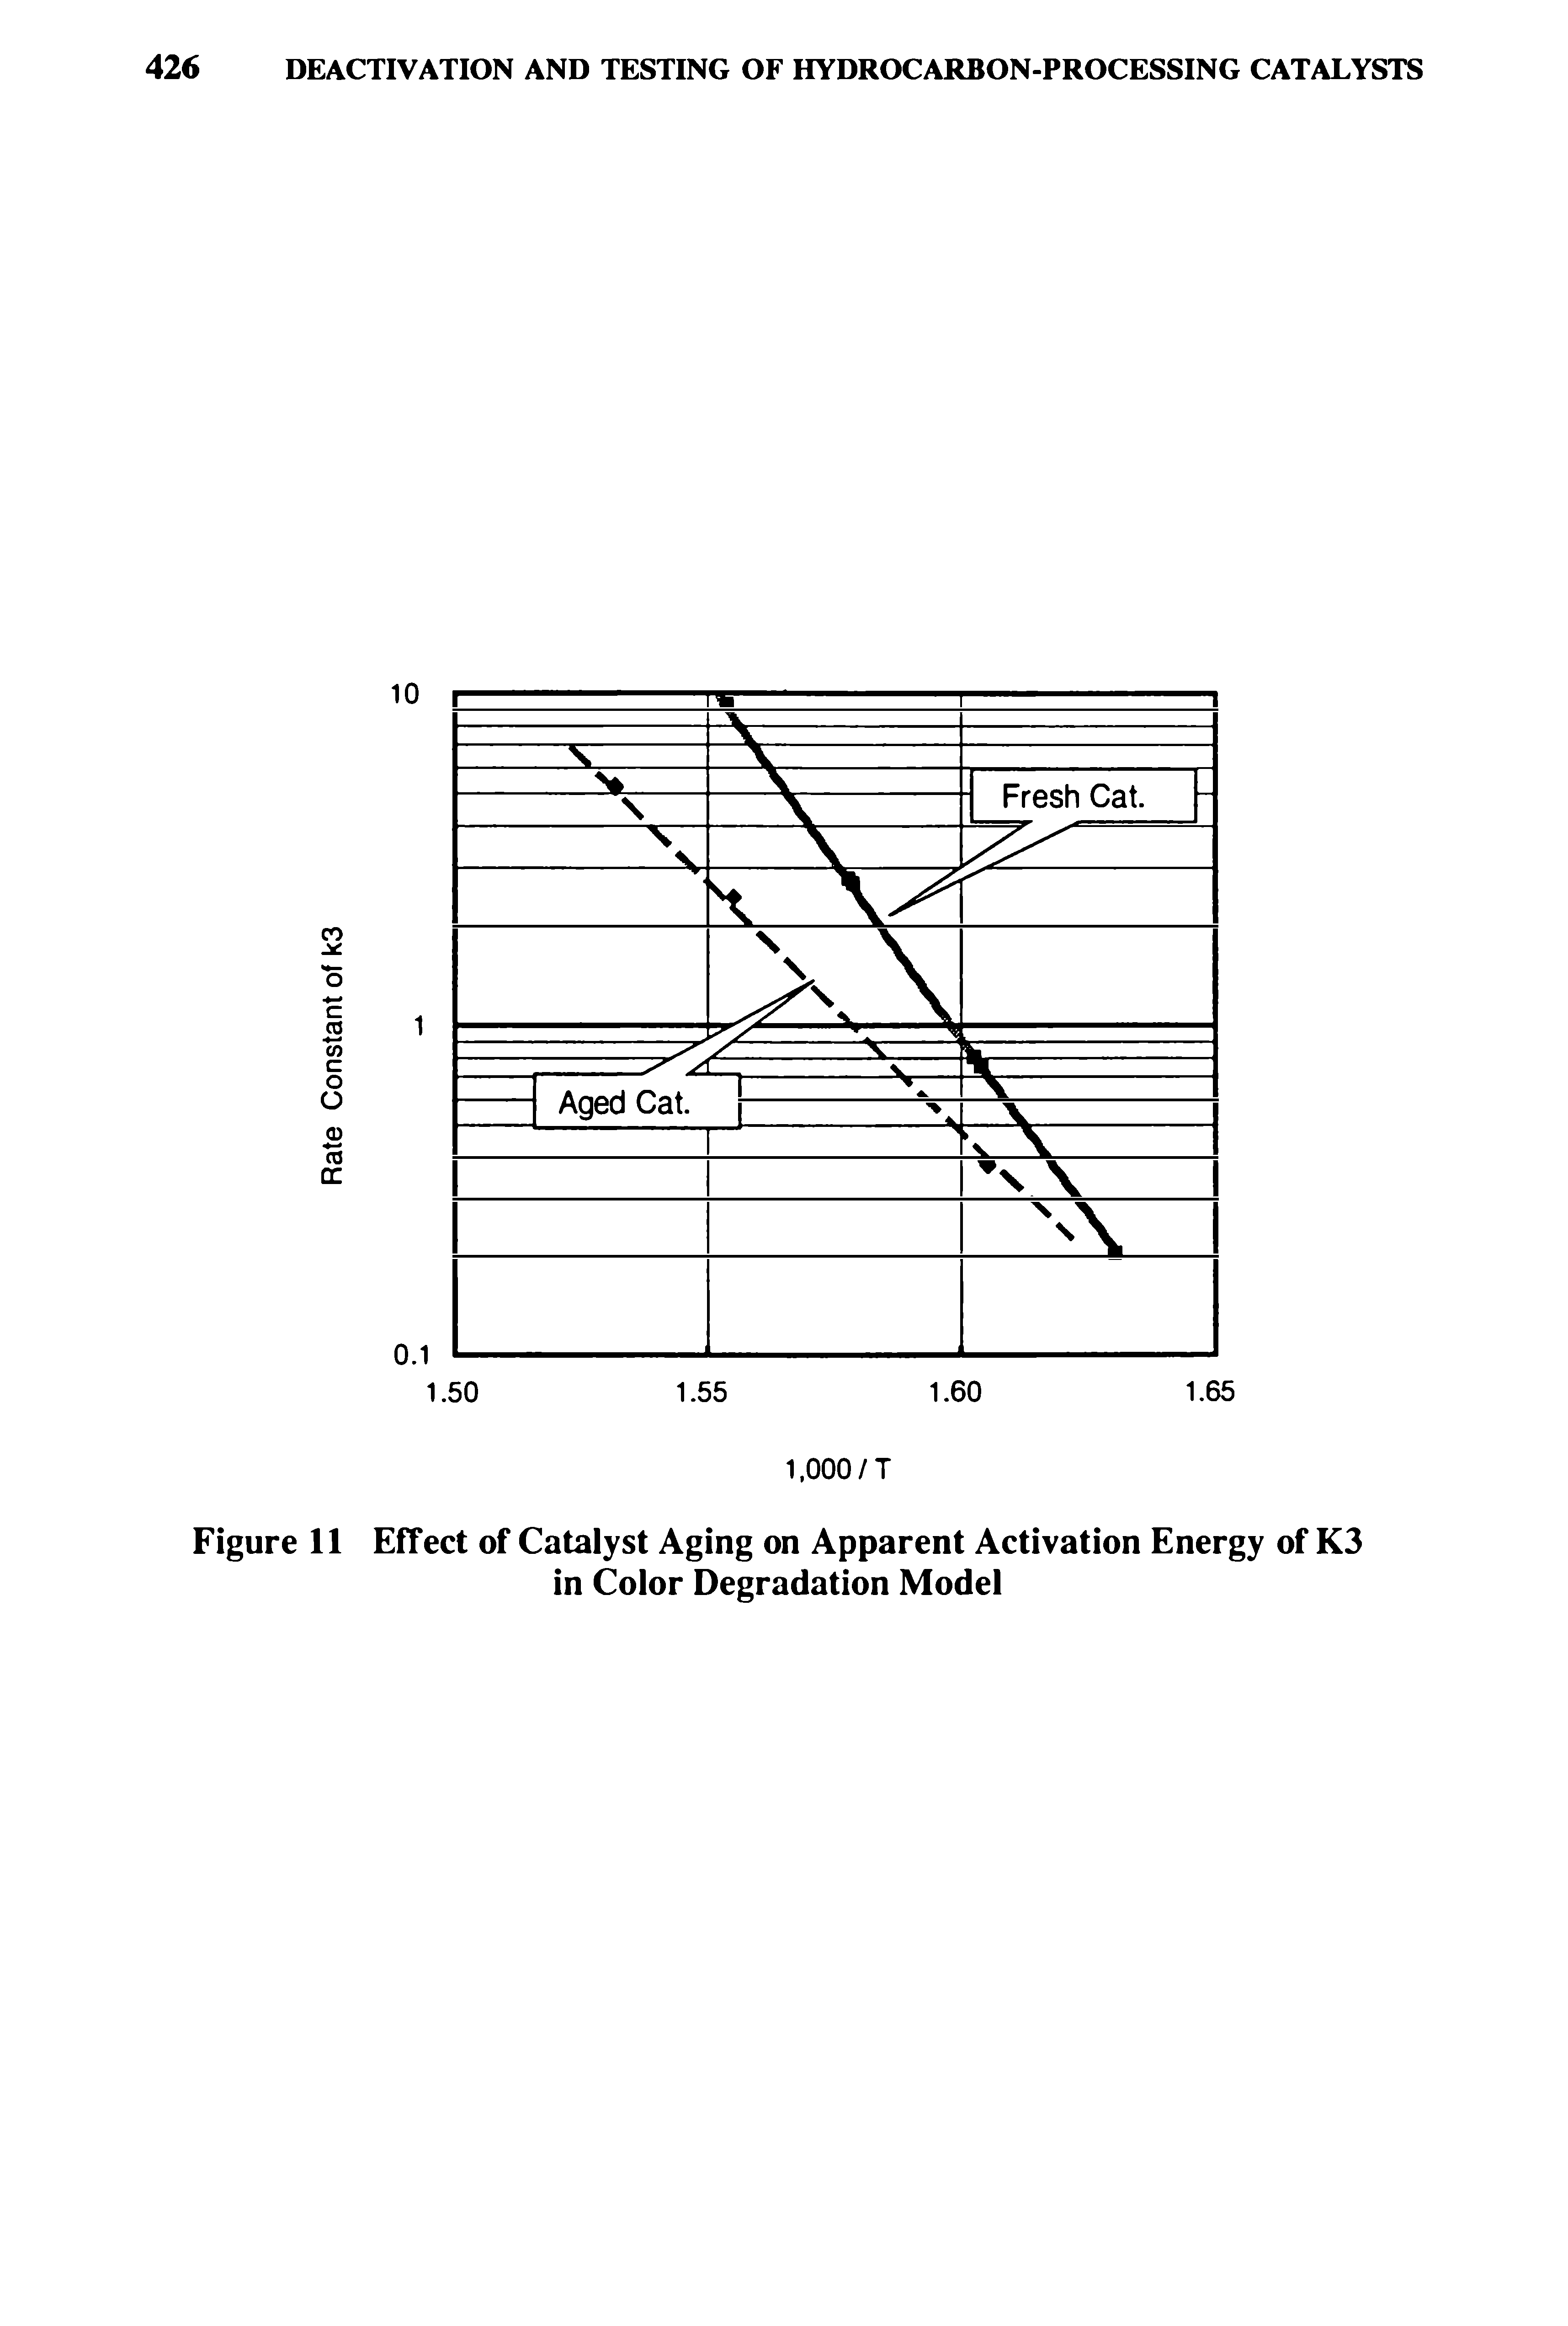 Figure 11 Effect of Catalyst Aging on Apparent Activation Energy of K3 in Color Degradation Model...